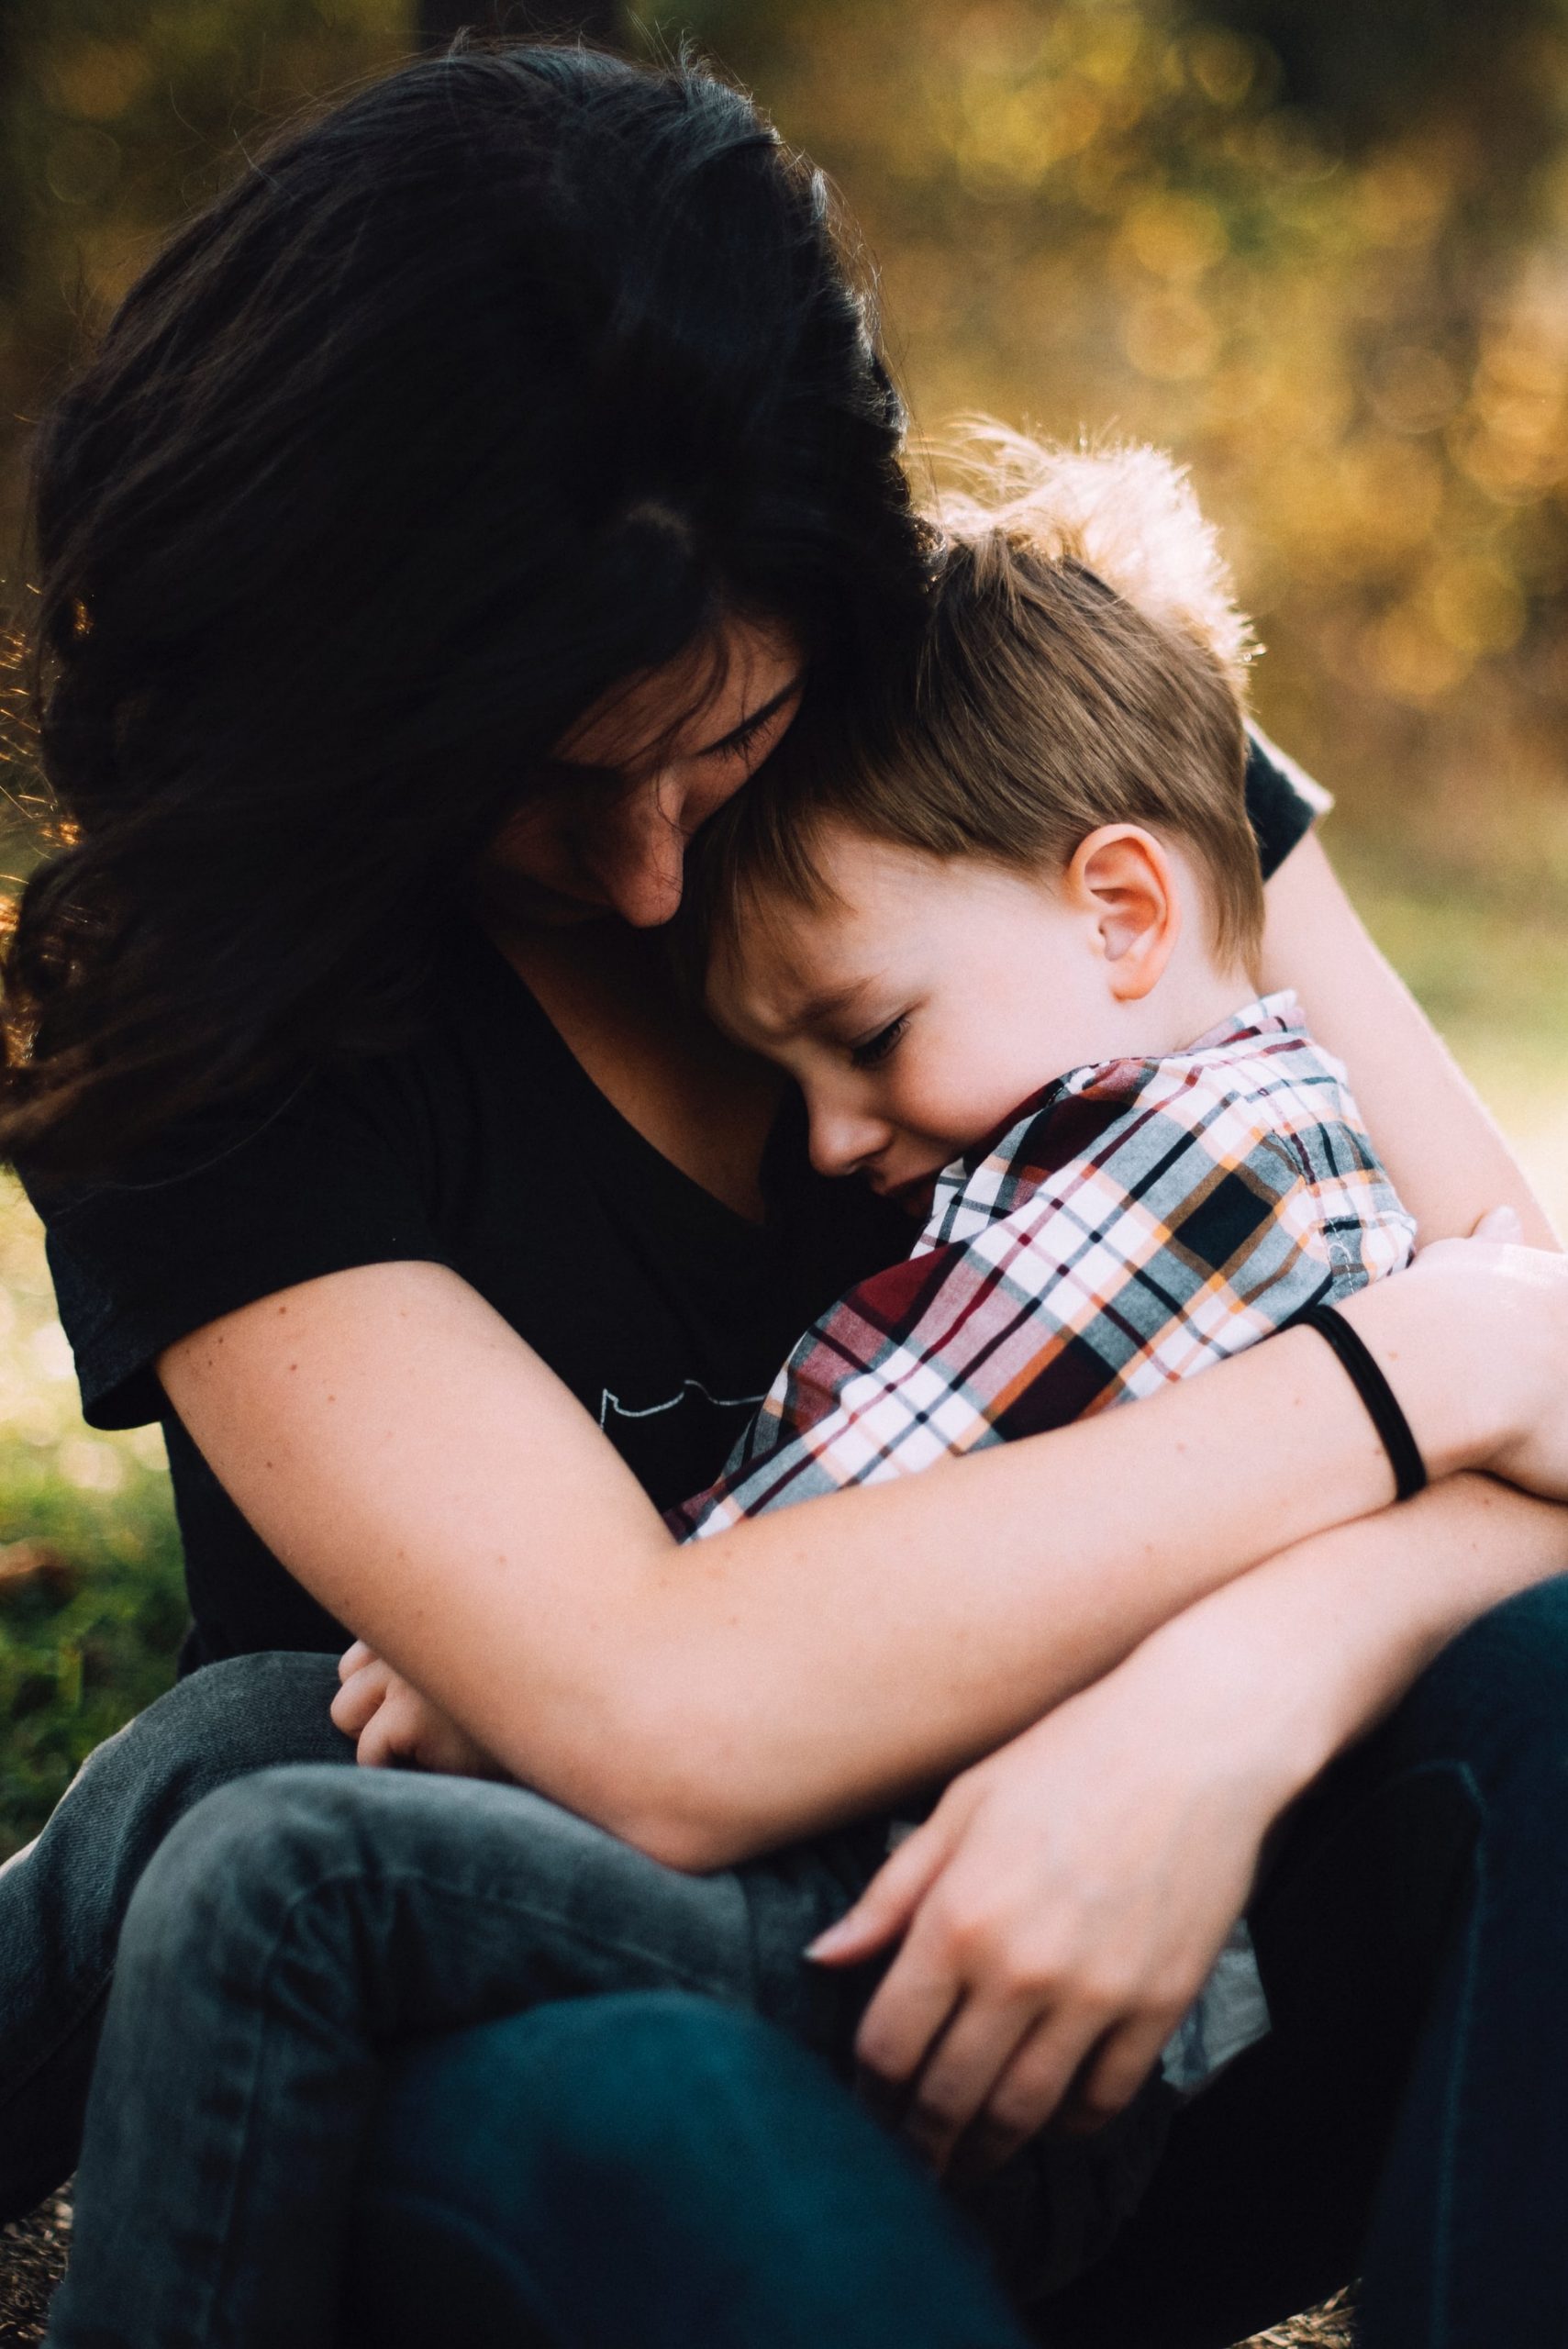 symptoms of anxiety in children, tips for being a single mom, single parent, single parent tips